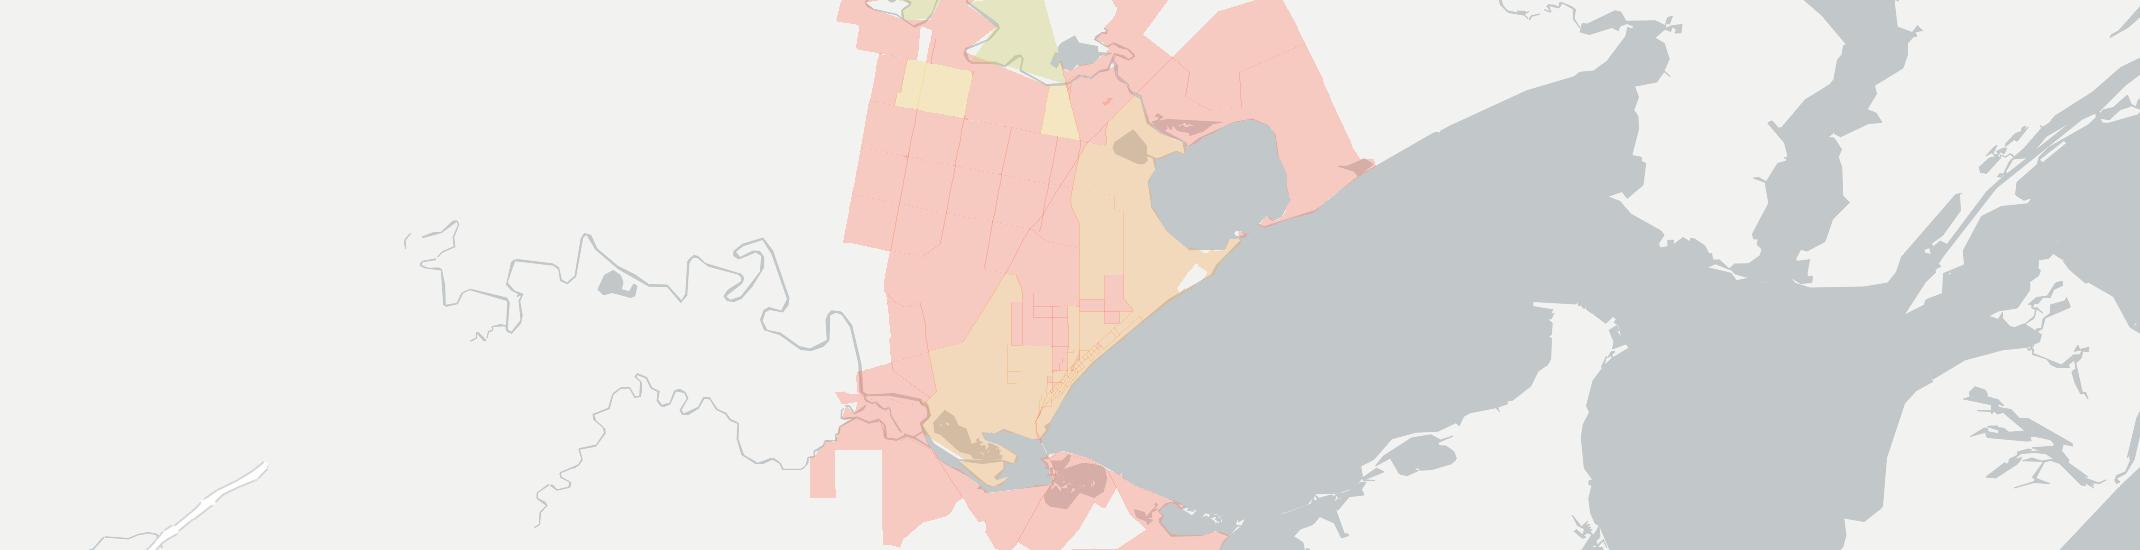 Bayside Internet Competition Map. Click for interactive map.